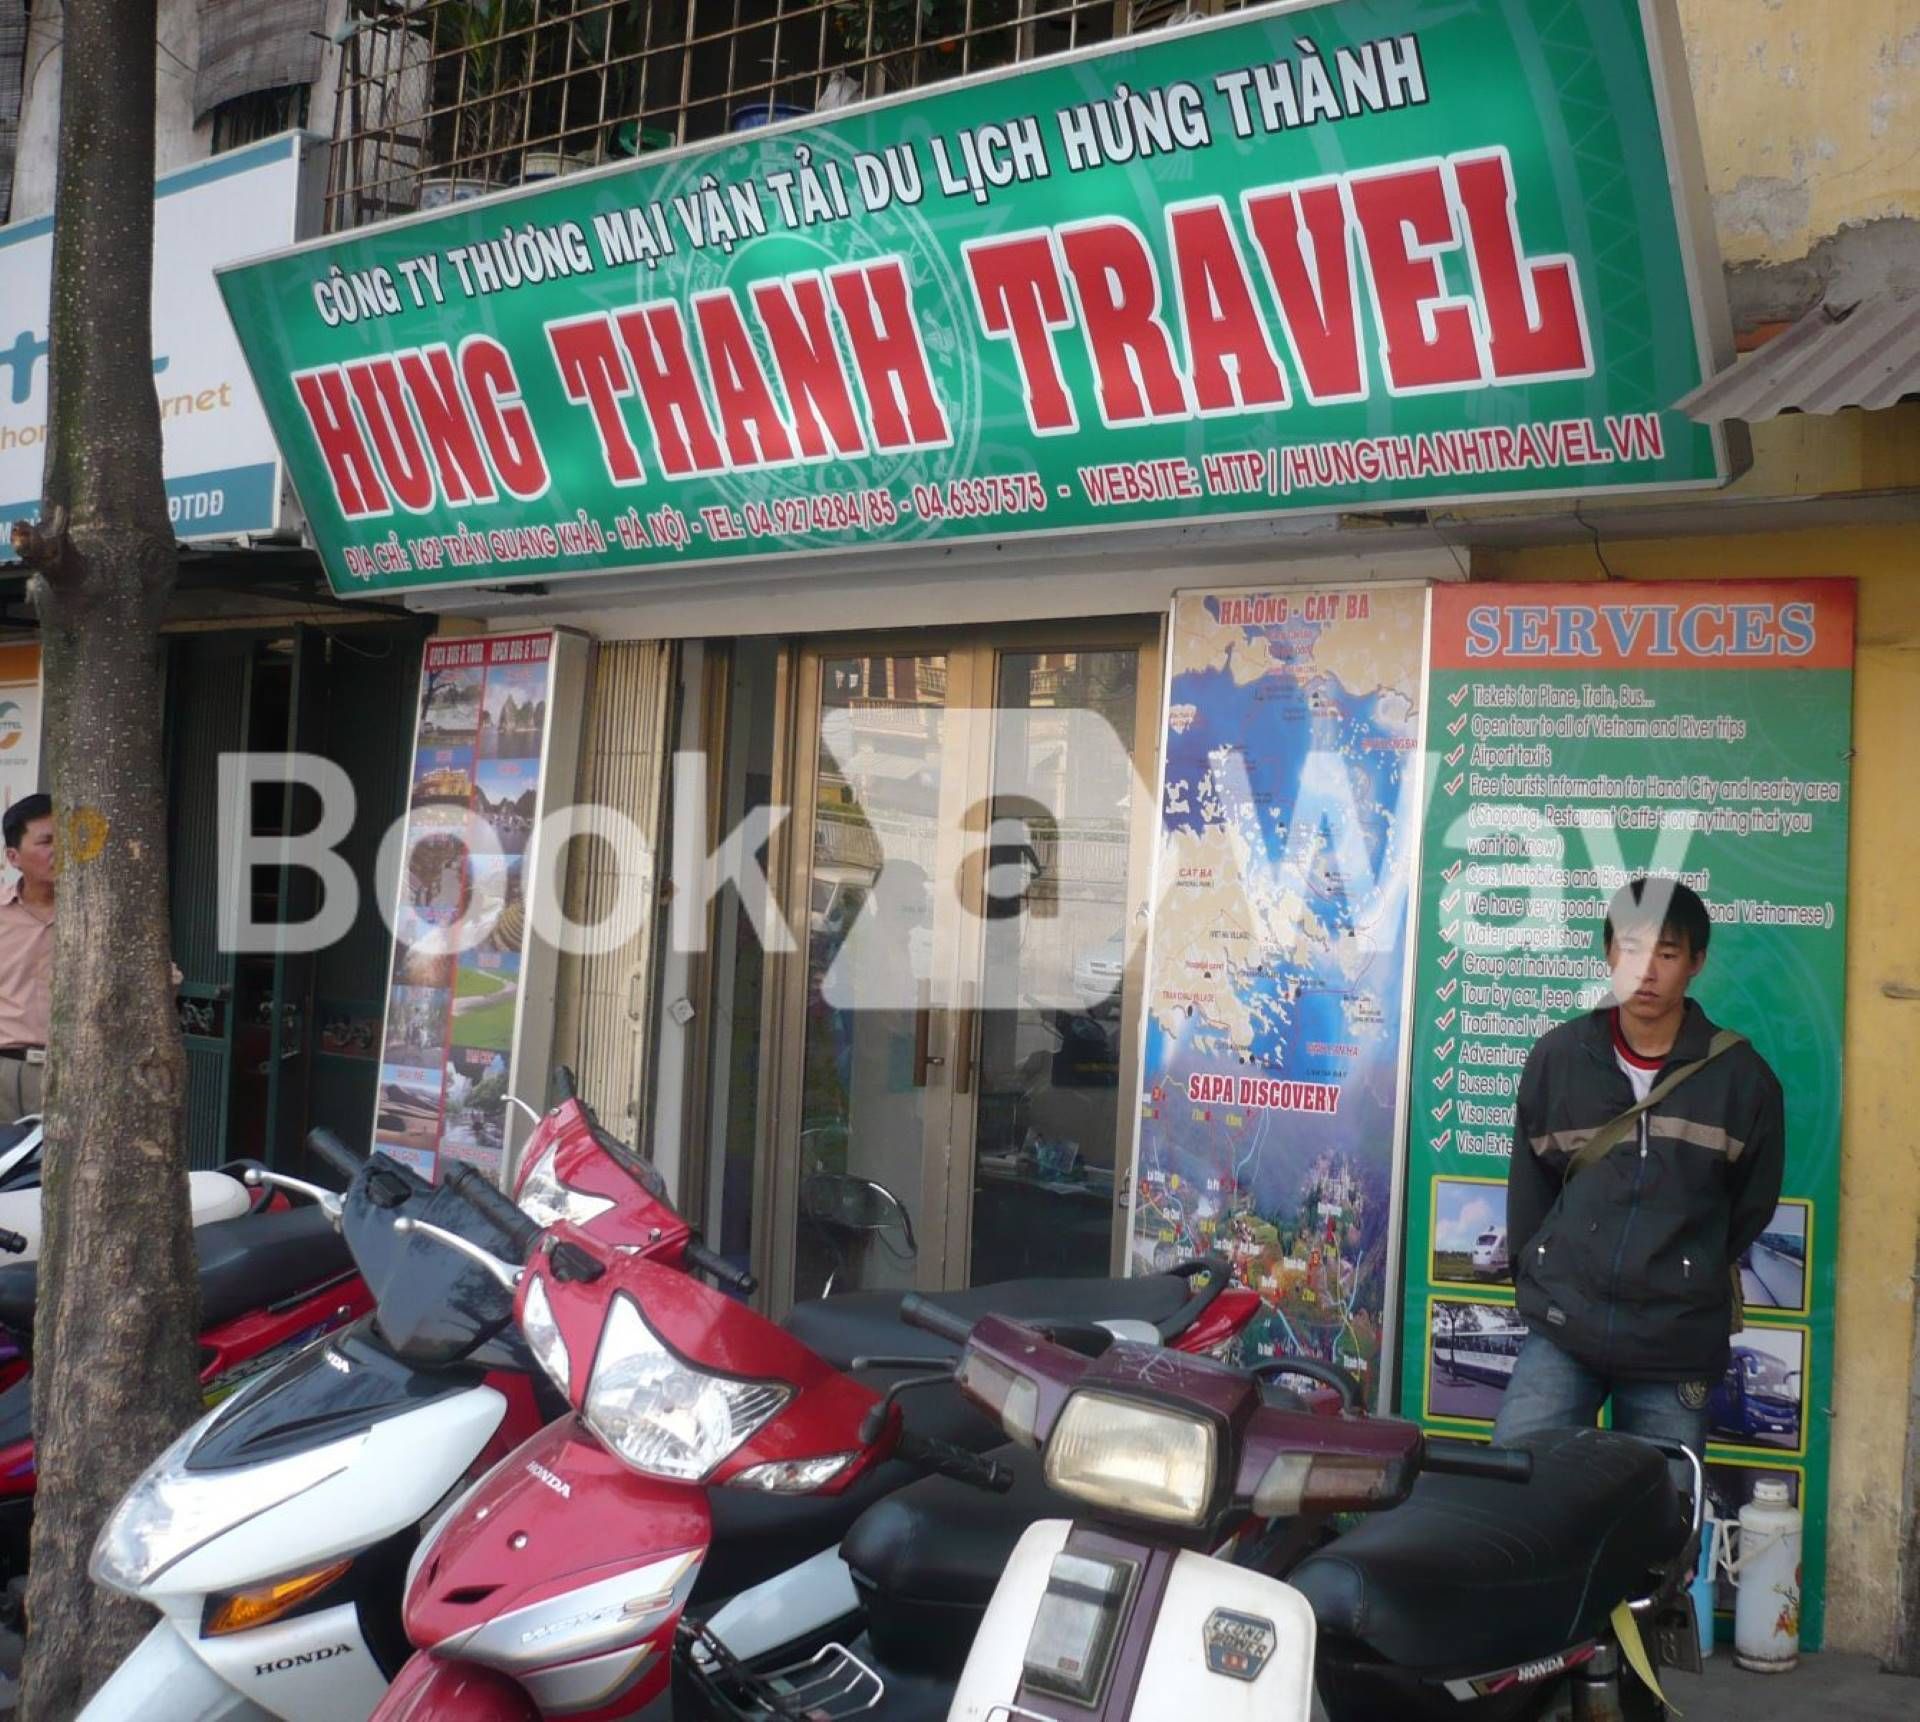 Hung Thanh Travel Office & Bus Stop